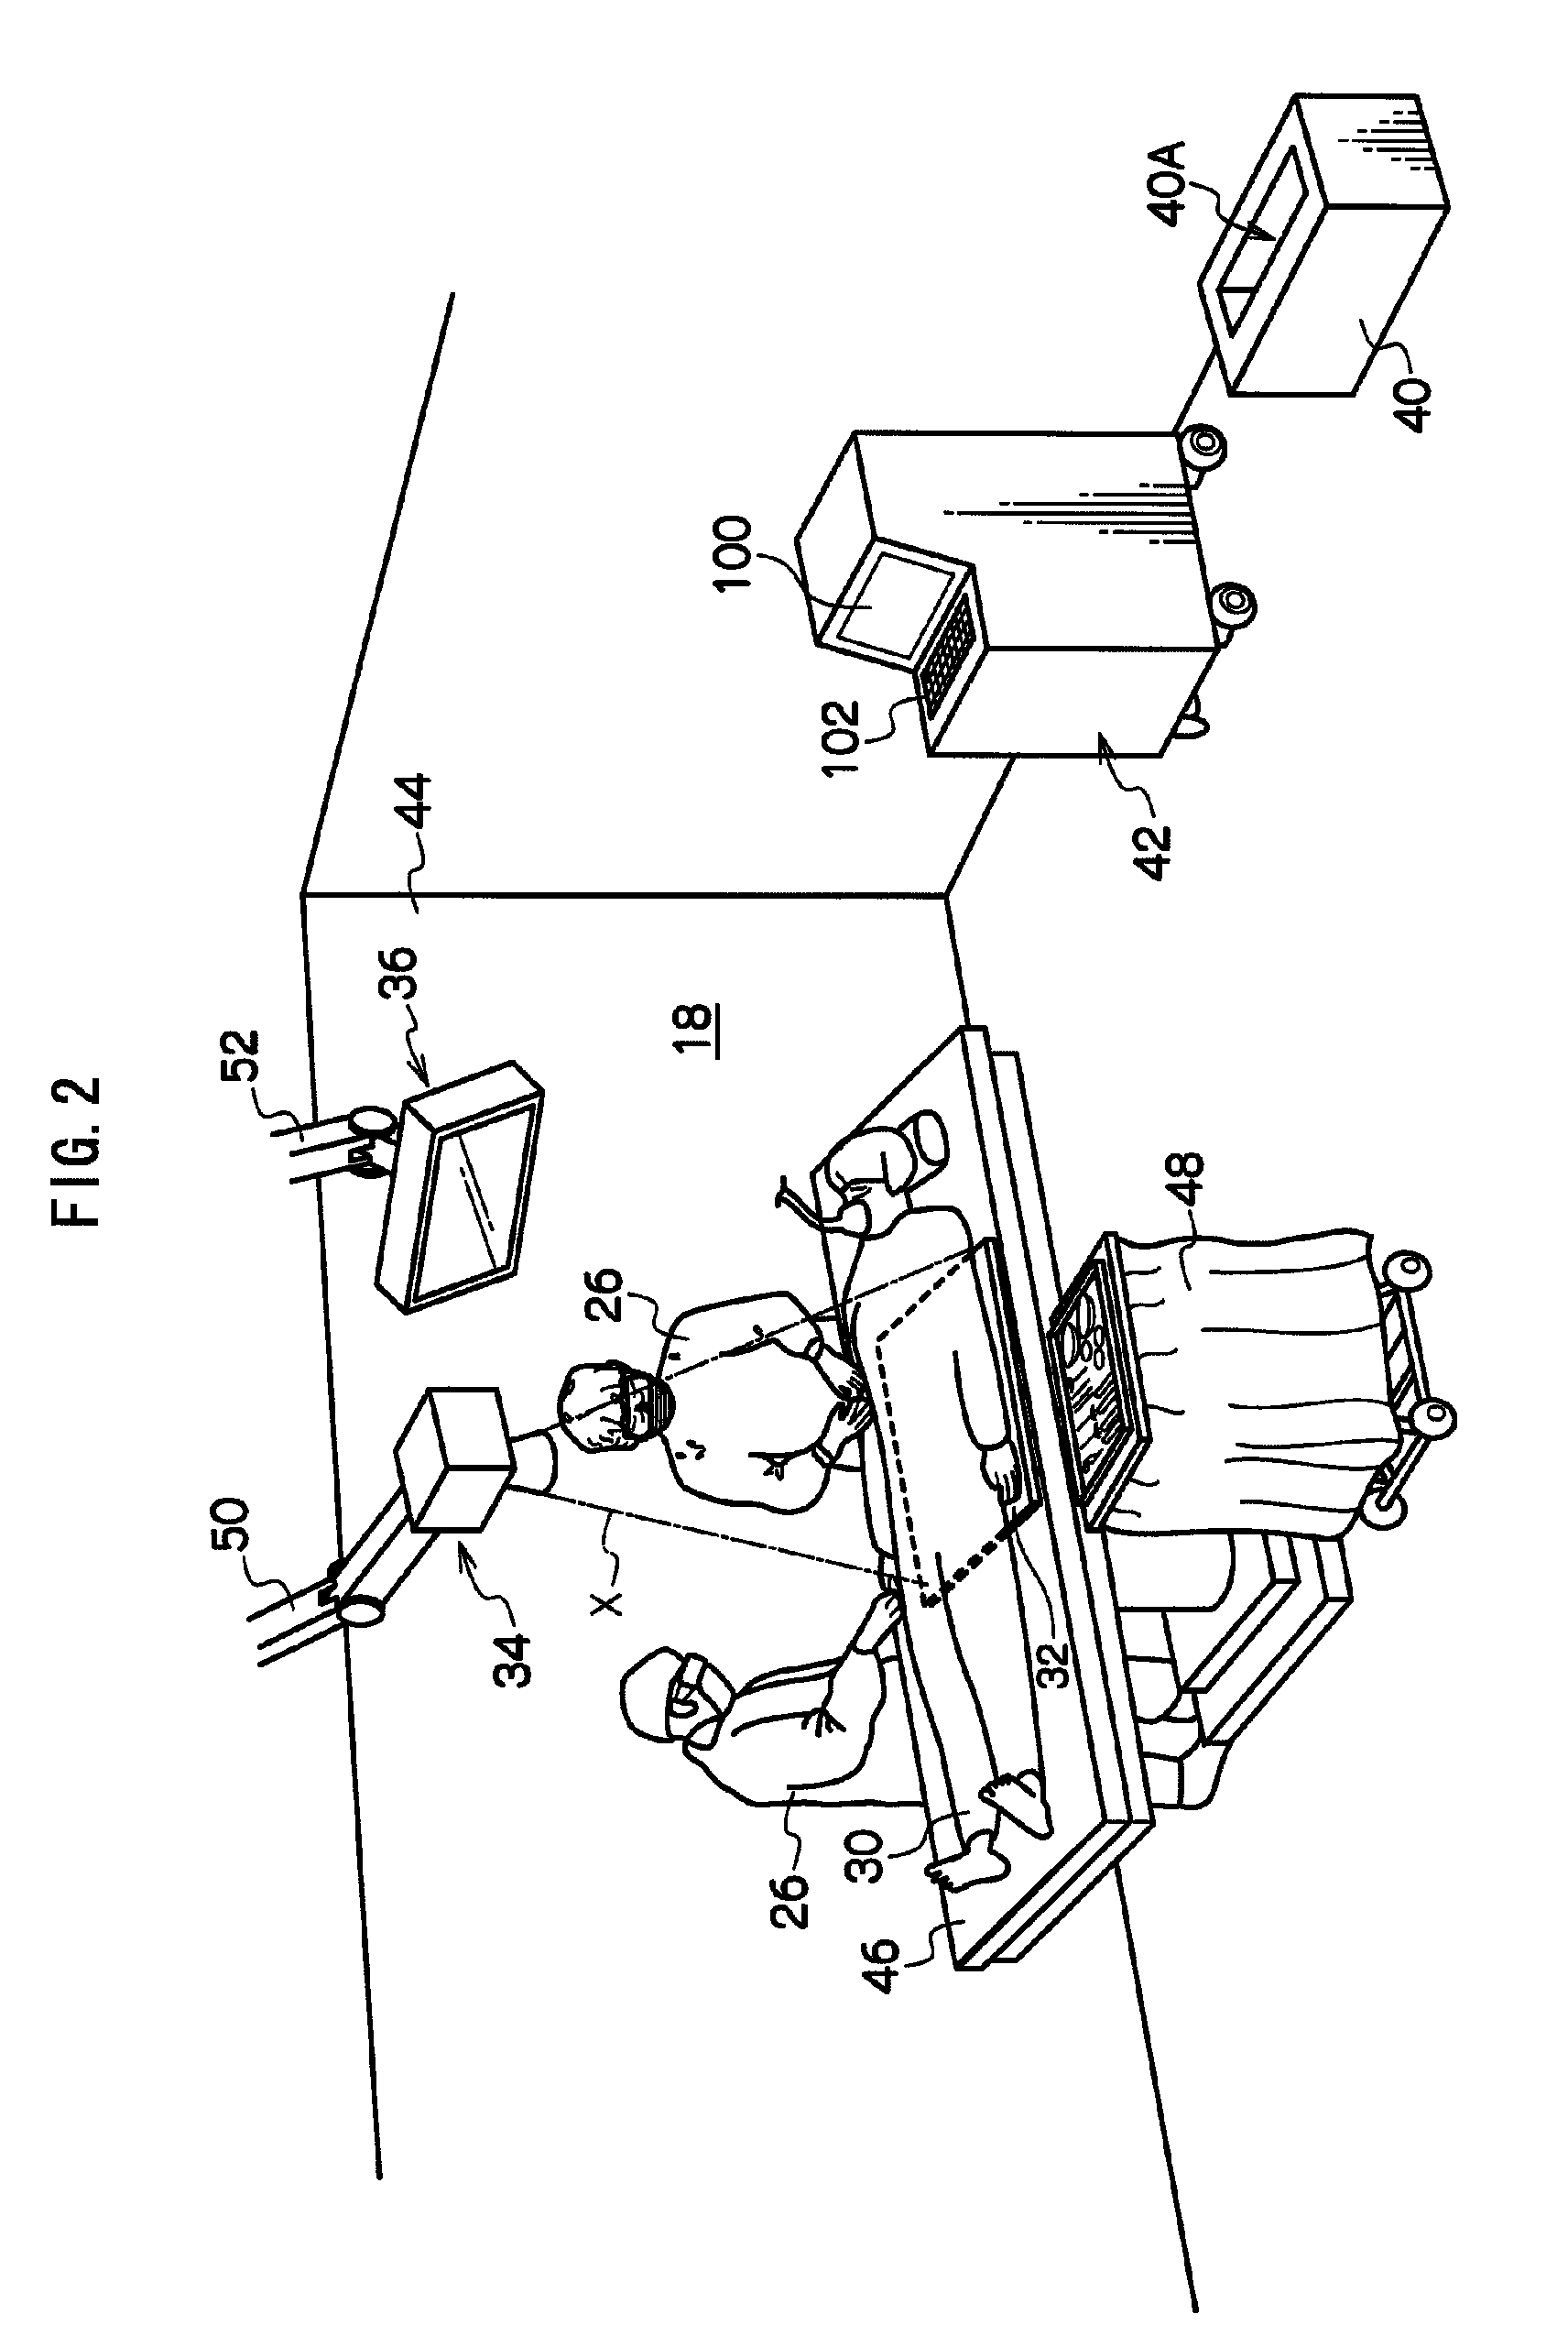 Radiographic imaging device, image processing device